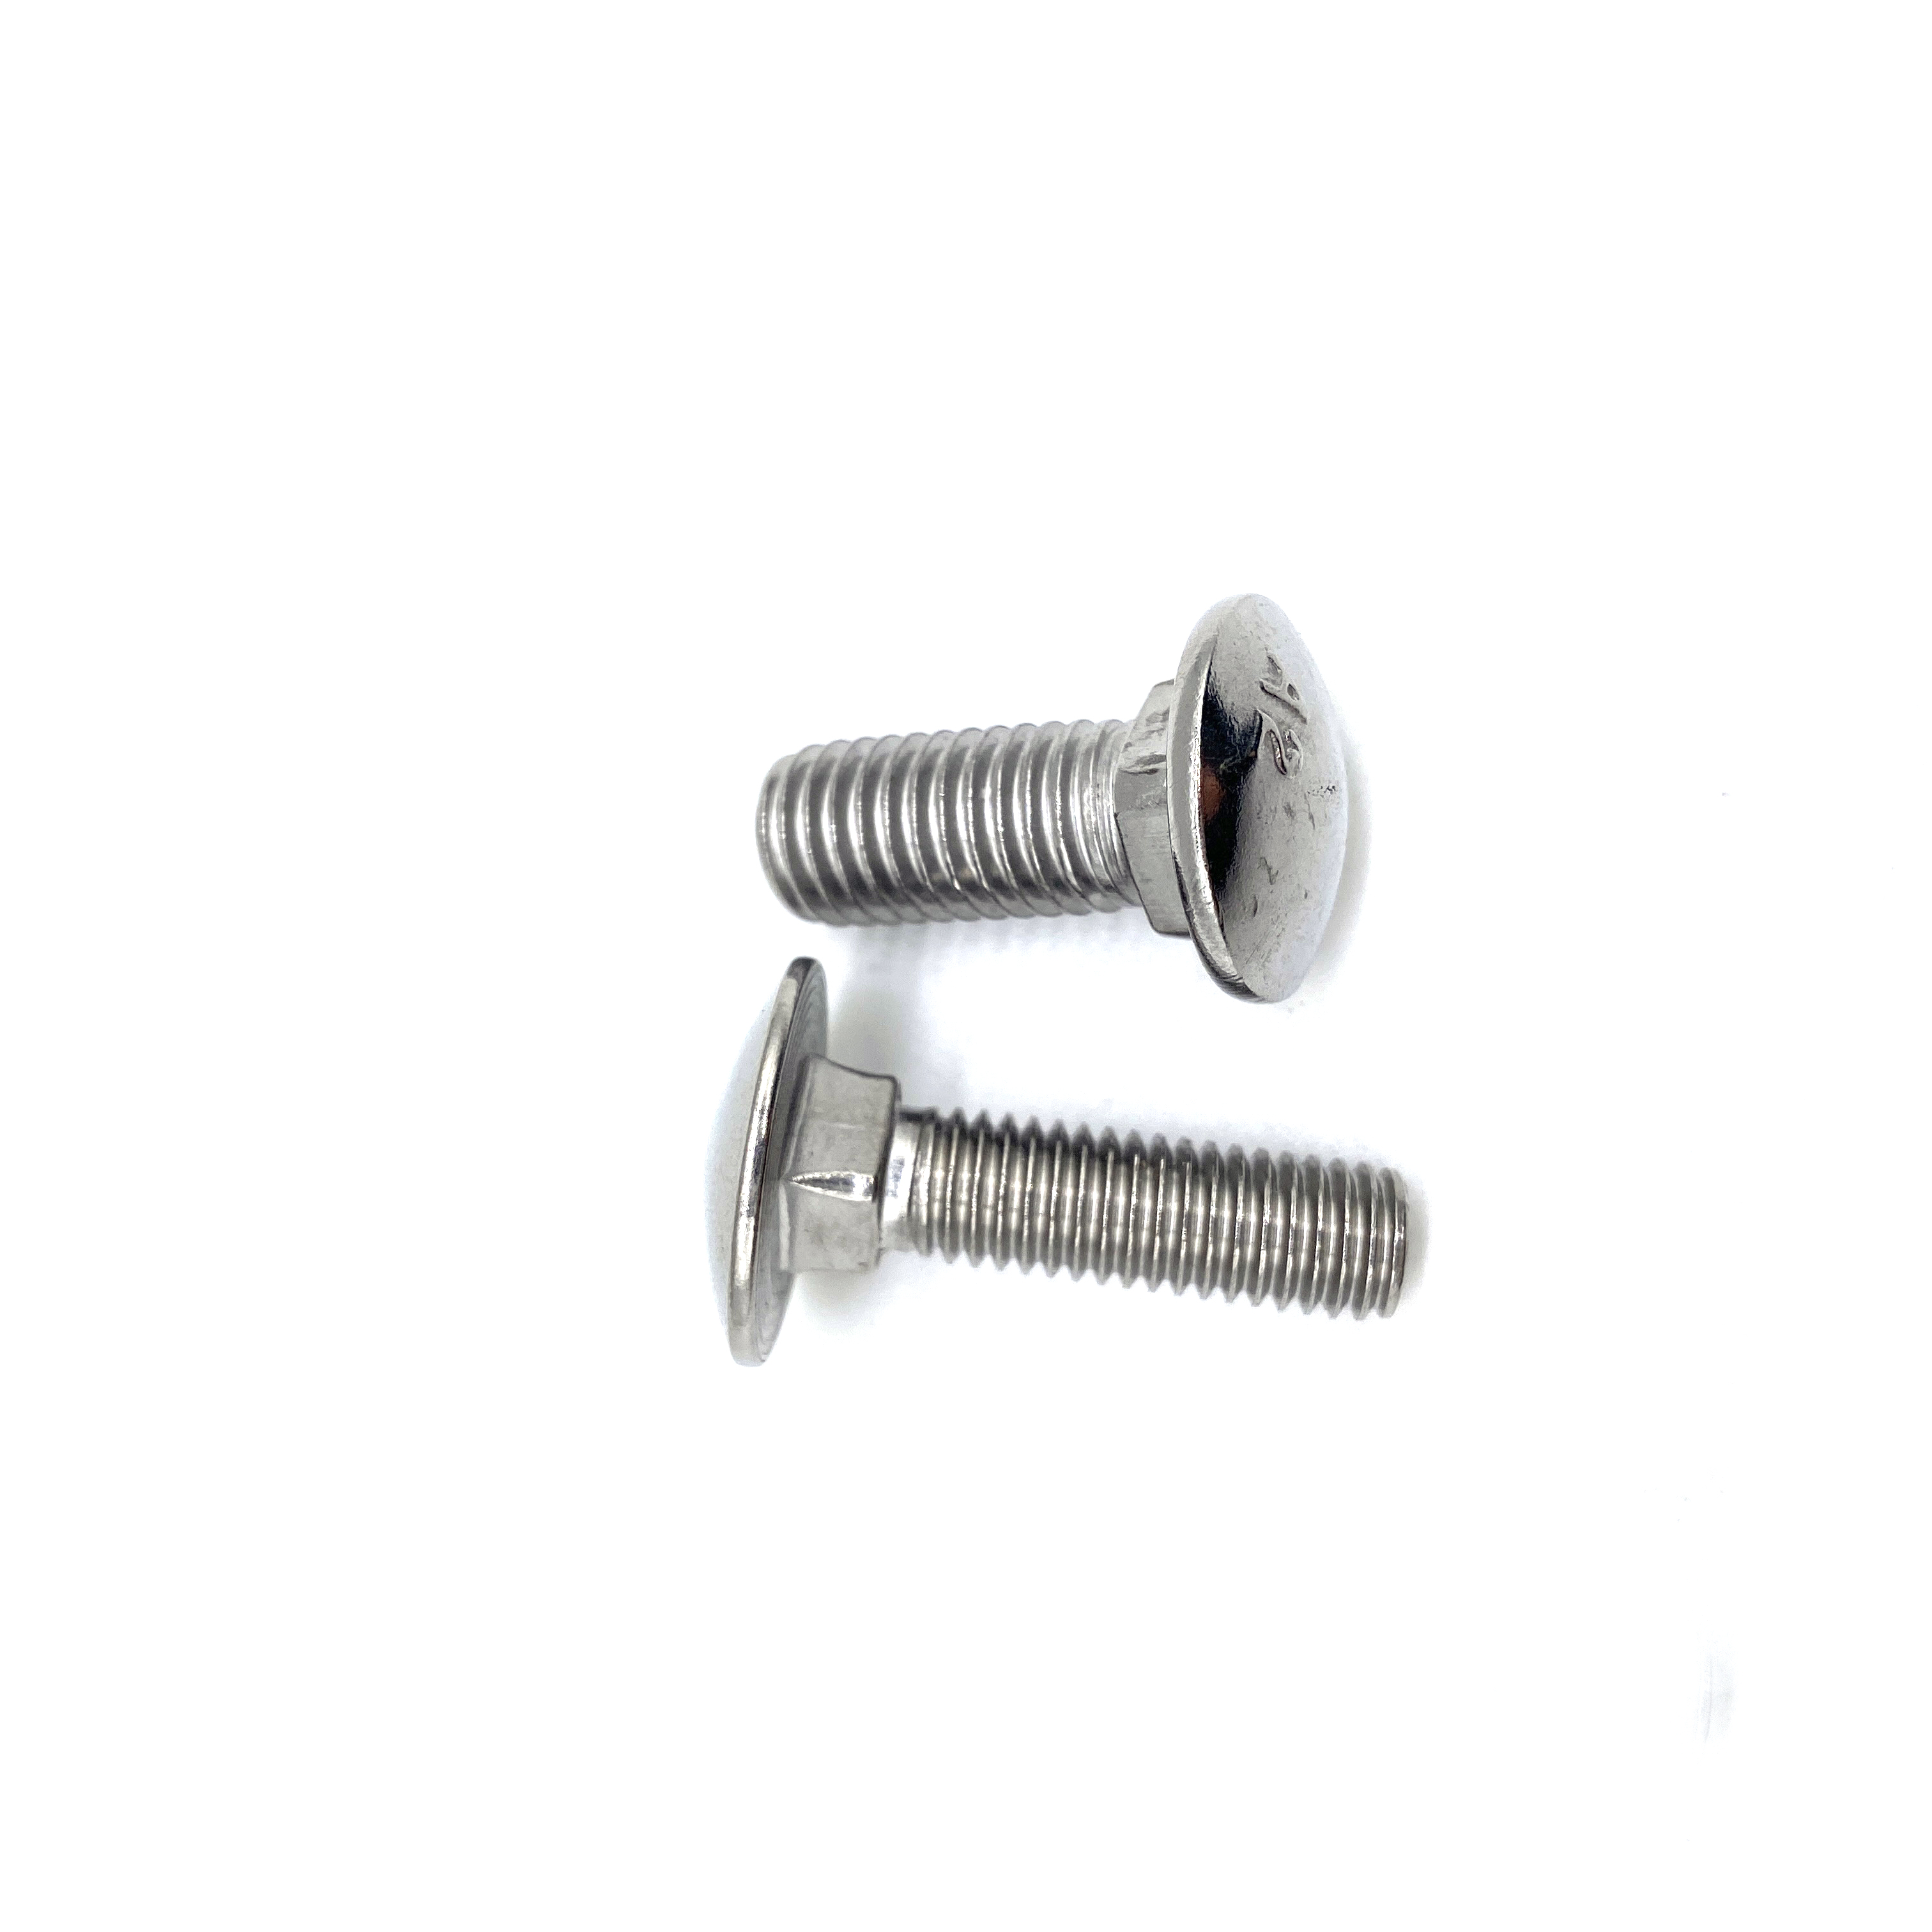 M5 M6 DIN603 INOX A4 INOX A2 Stainless Steel 314 316 Square Neck Carriage Bolt 